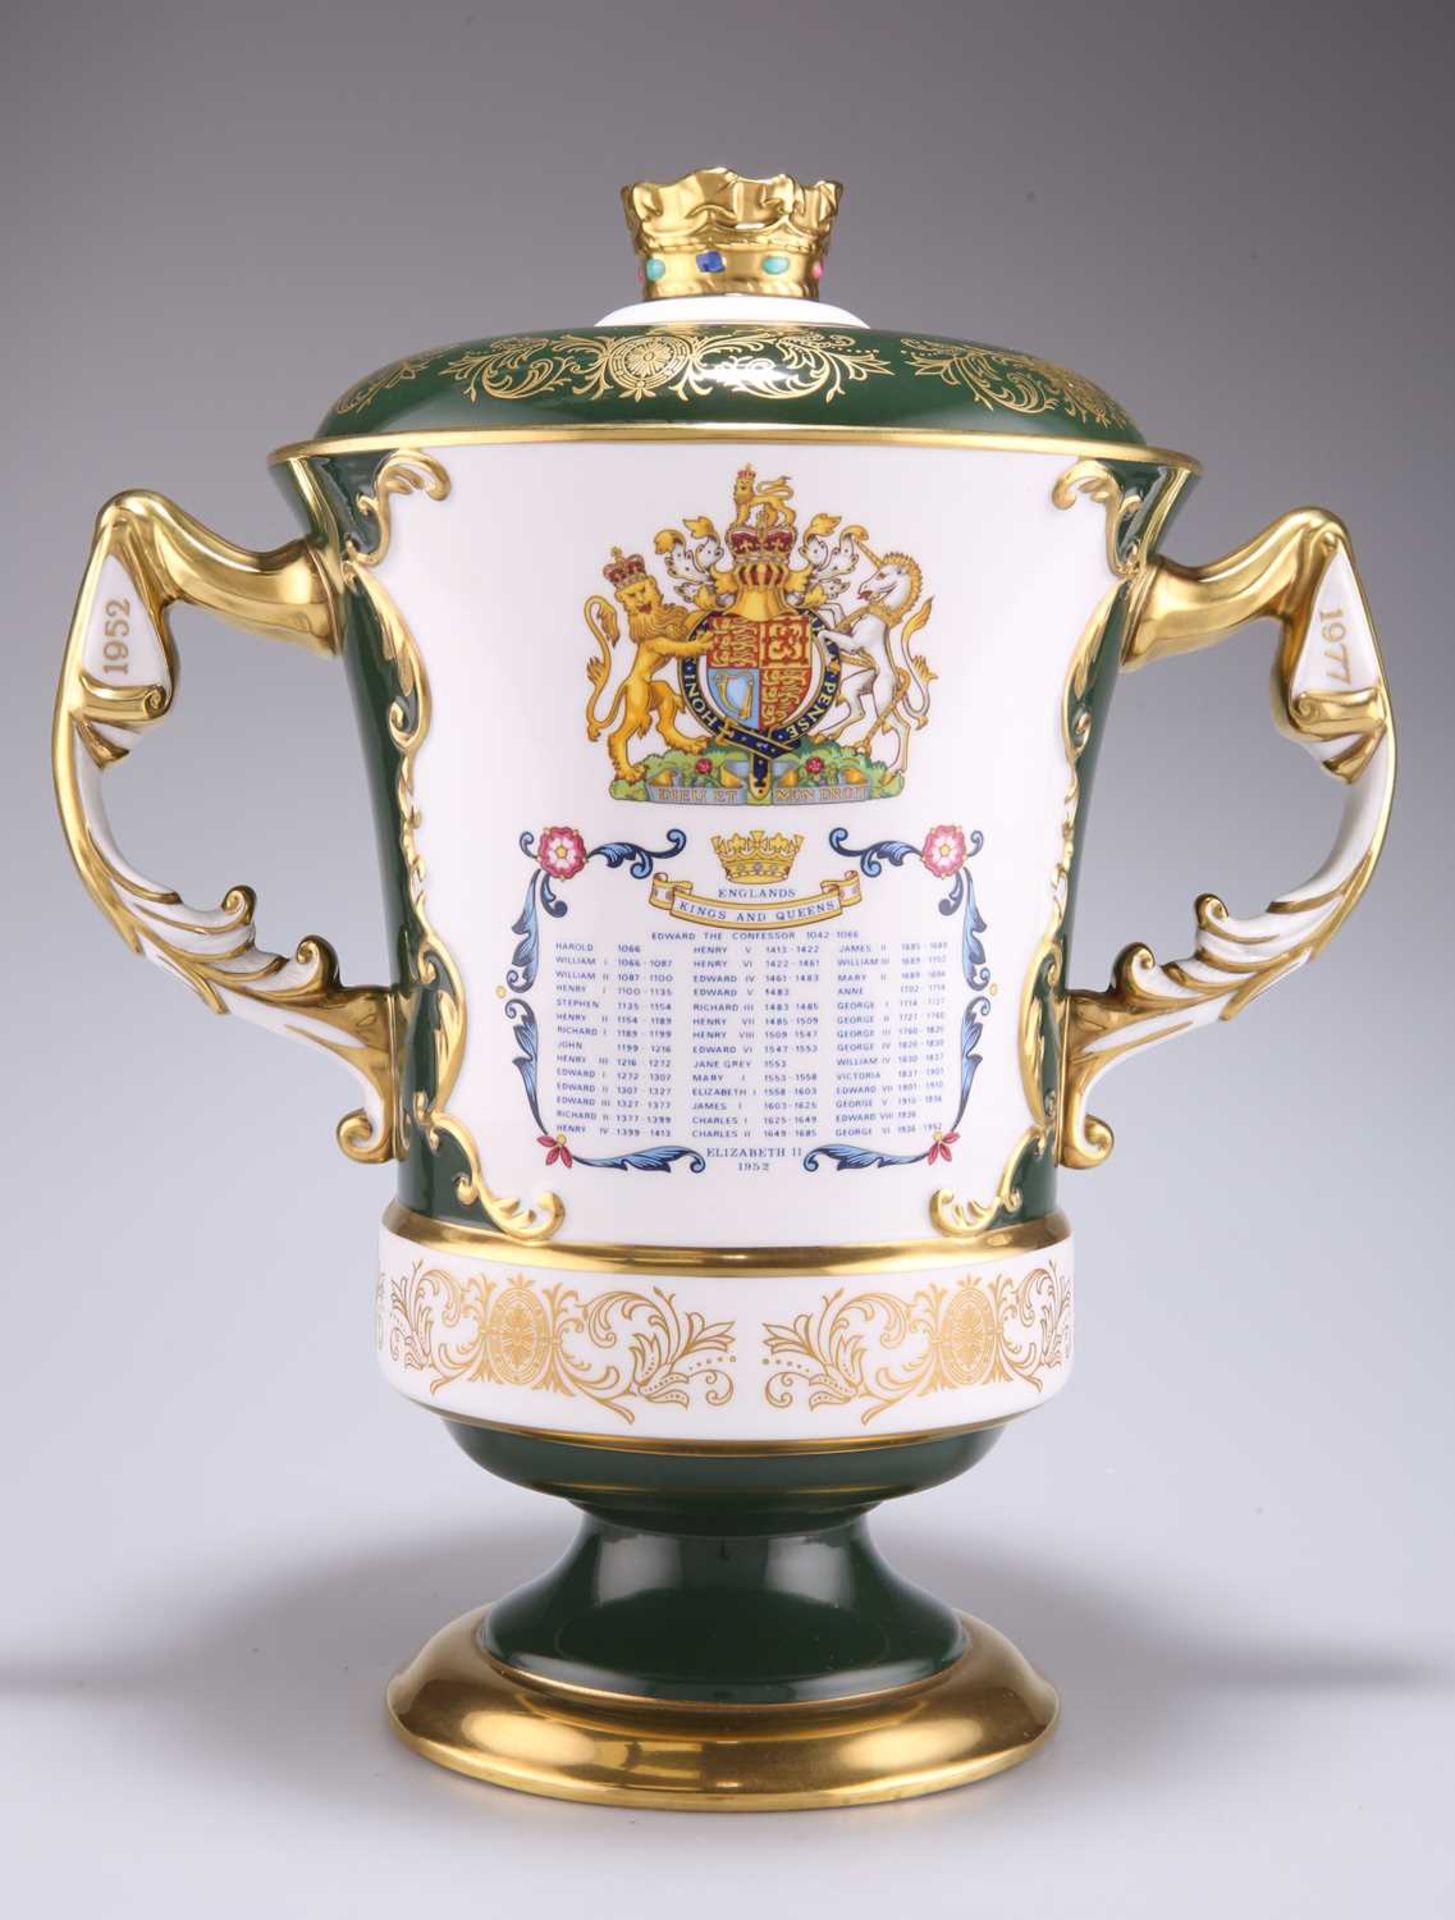 A LARGE AYNSLEY LIMITED EDITION LOVING CUP AND COVER, "THE JUBILEE VASE" - Image 2 of 4